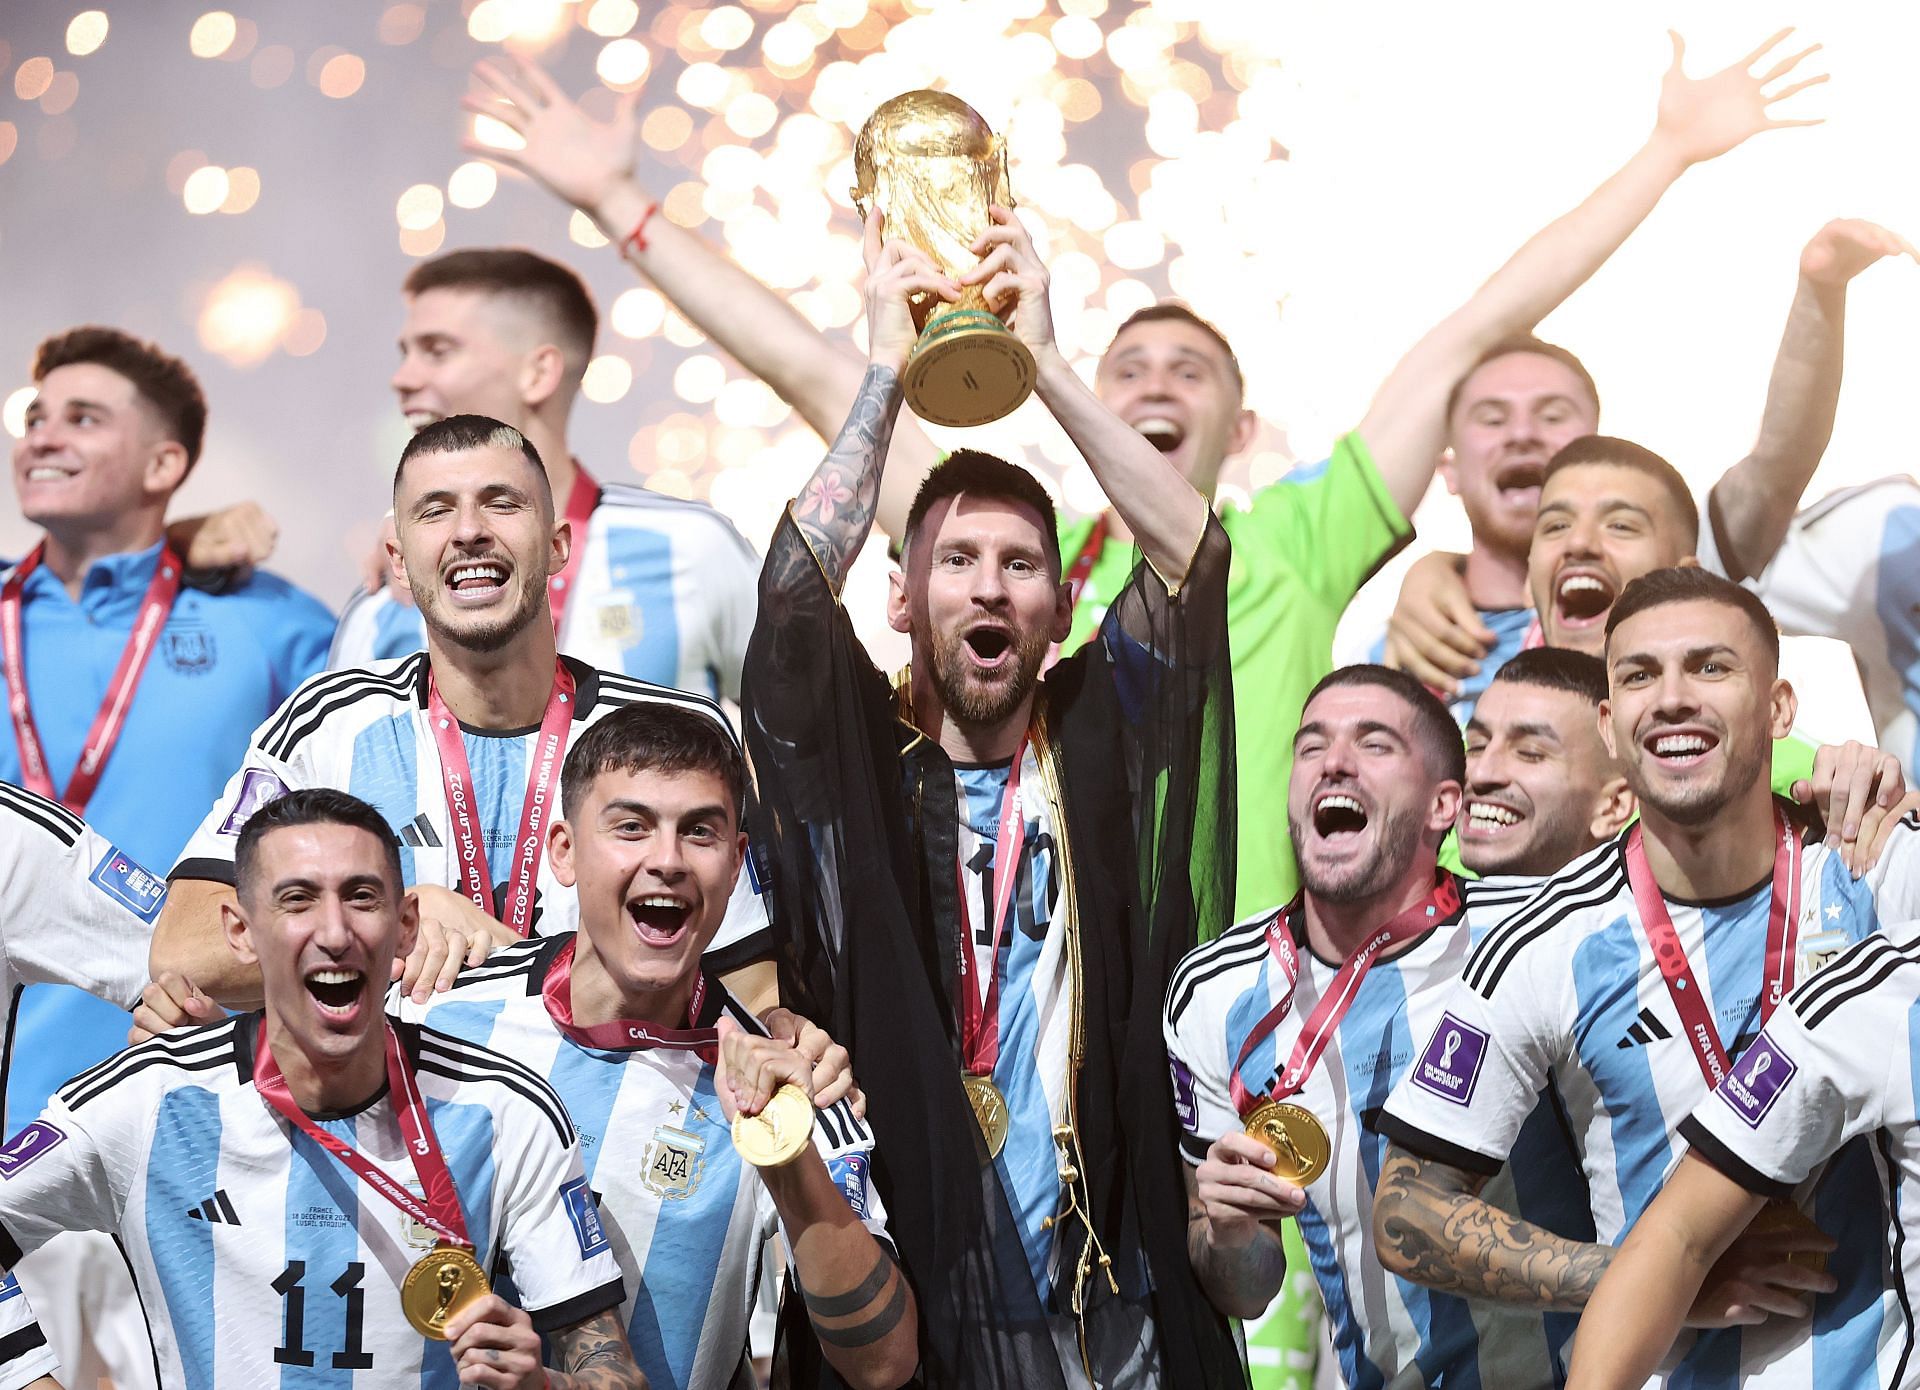 Lionel Messi fulfiled his legacy by winning the World Cup in December.